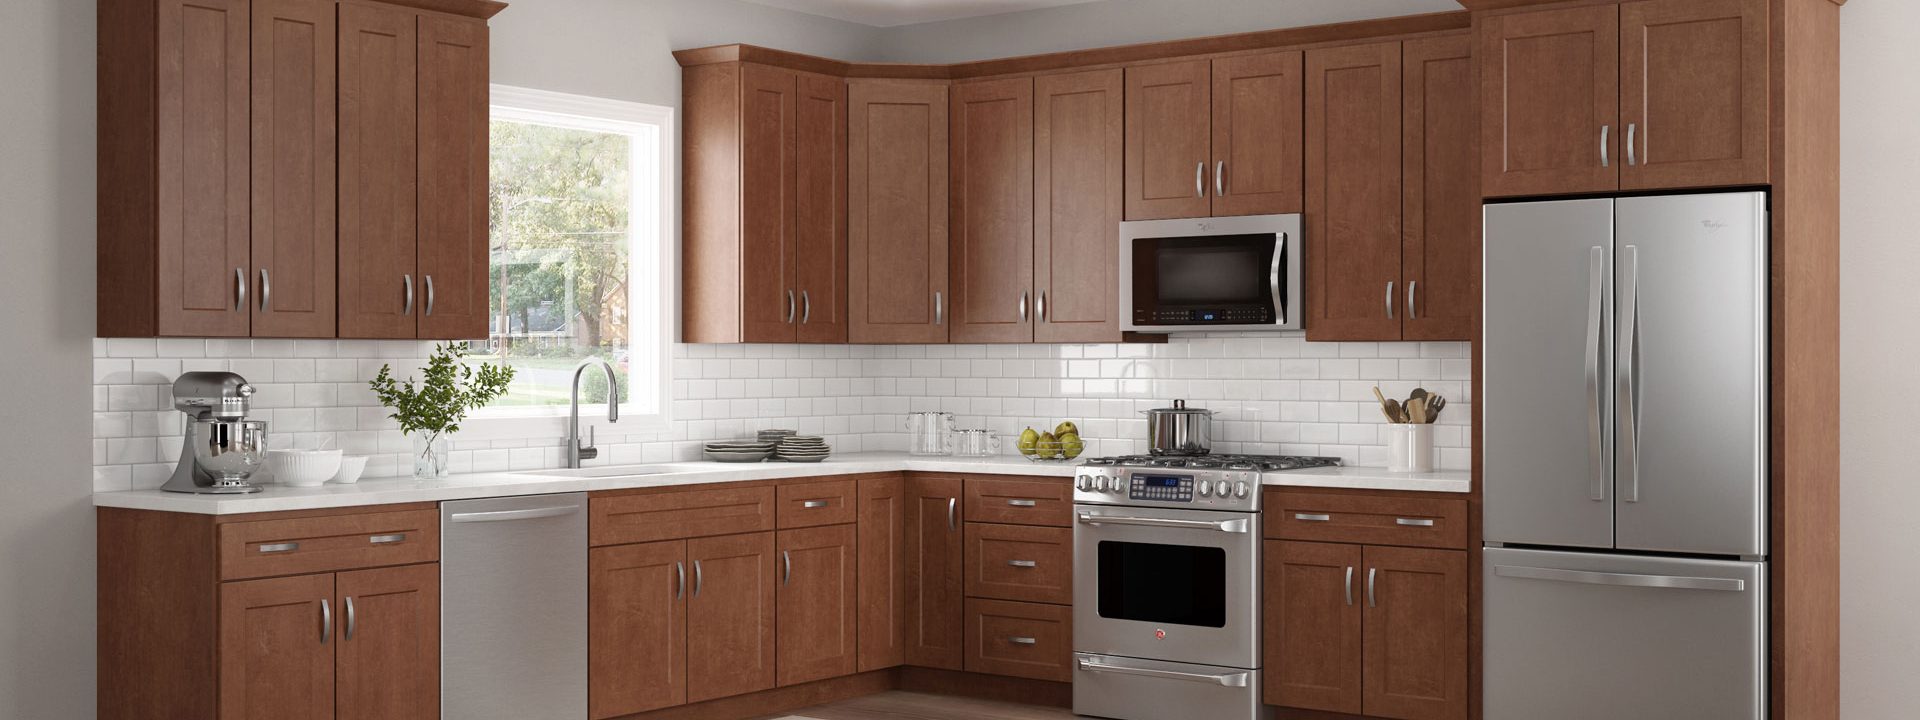 kountry cabinets store cabinets for sale in south bend indiana jamestown autumn kitchen cabinets